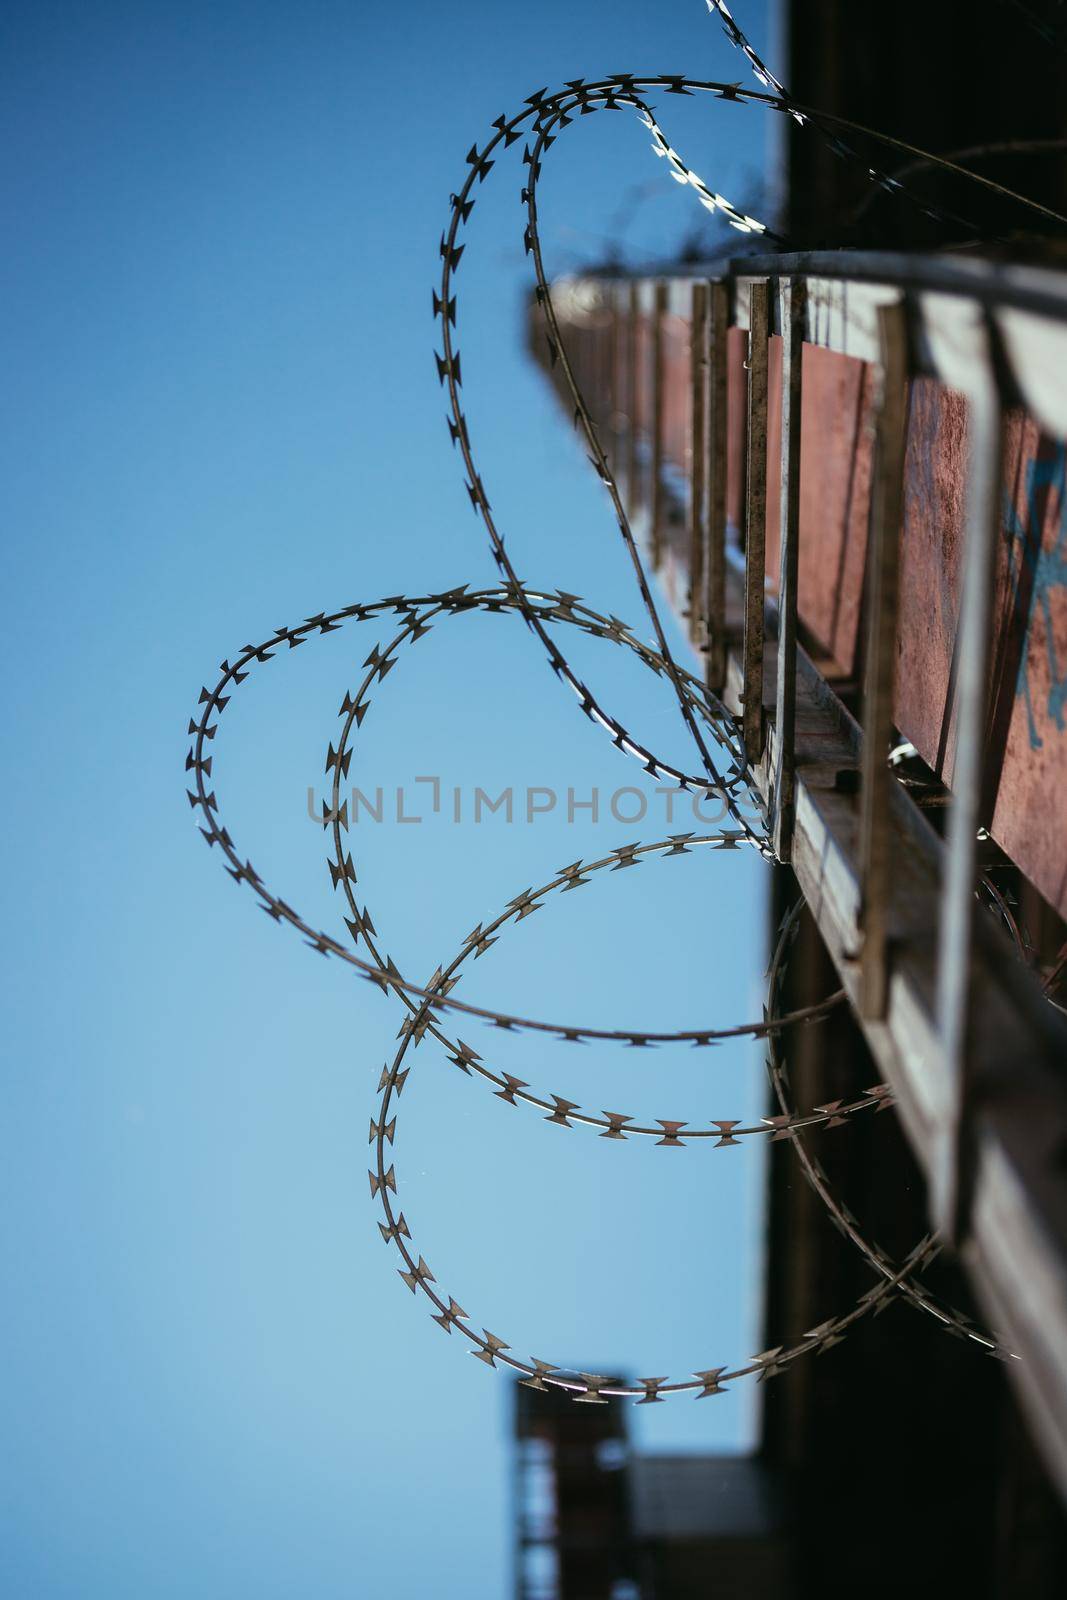 Barbed wire in the prison or on military base, close up perspective by Daxenbichler